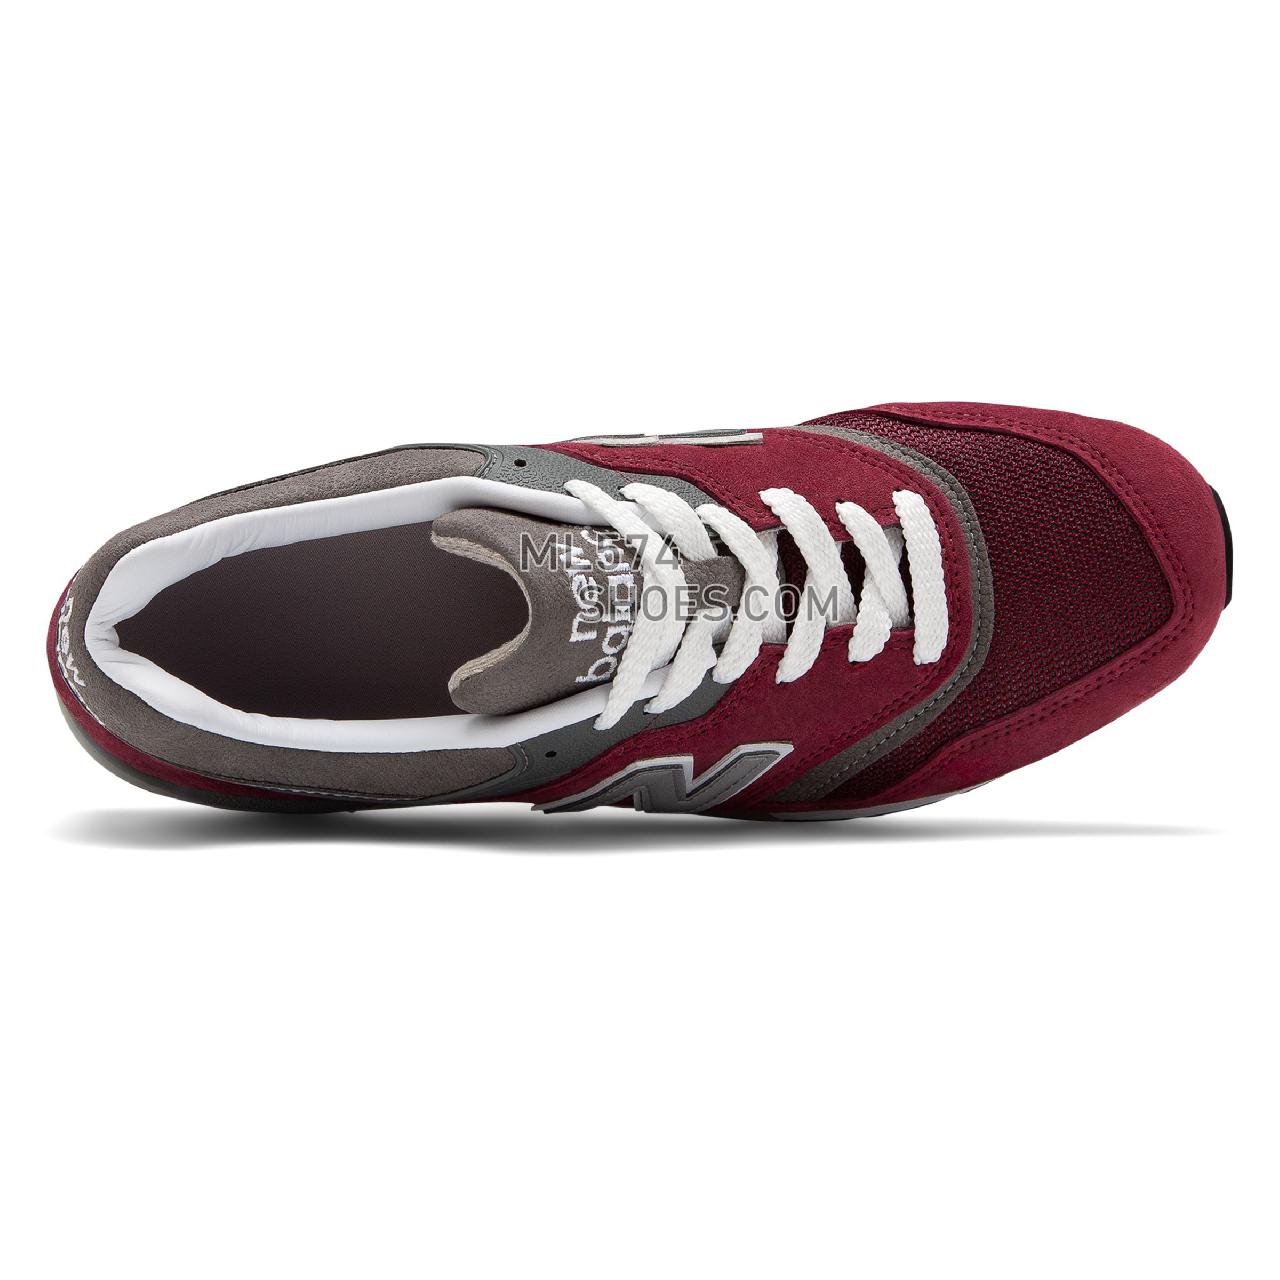 New Balance Made in US 997 - Men's Made in US 997 - Burgundy with Grey - M997BR